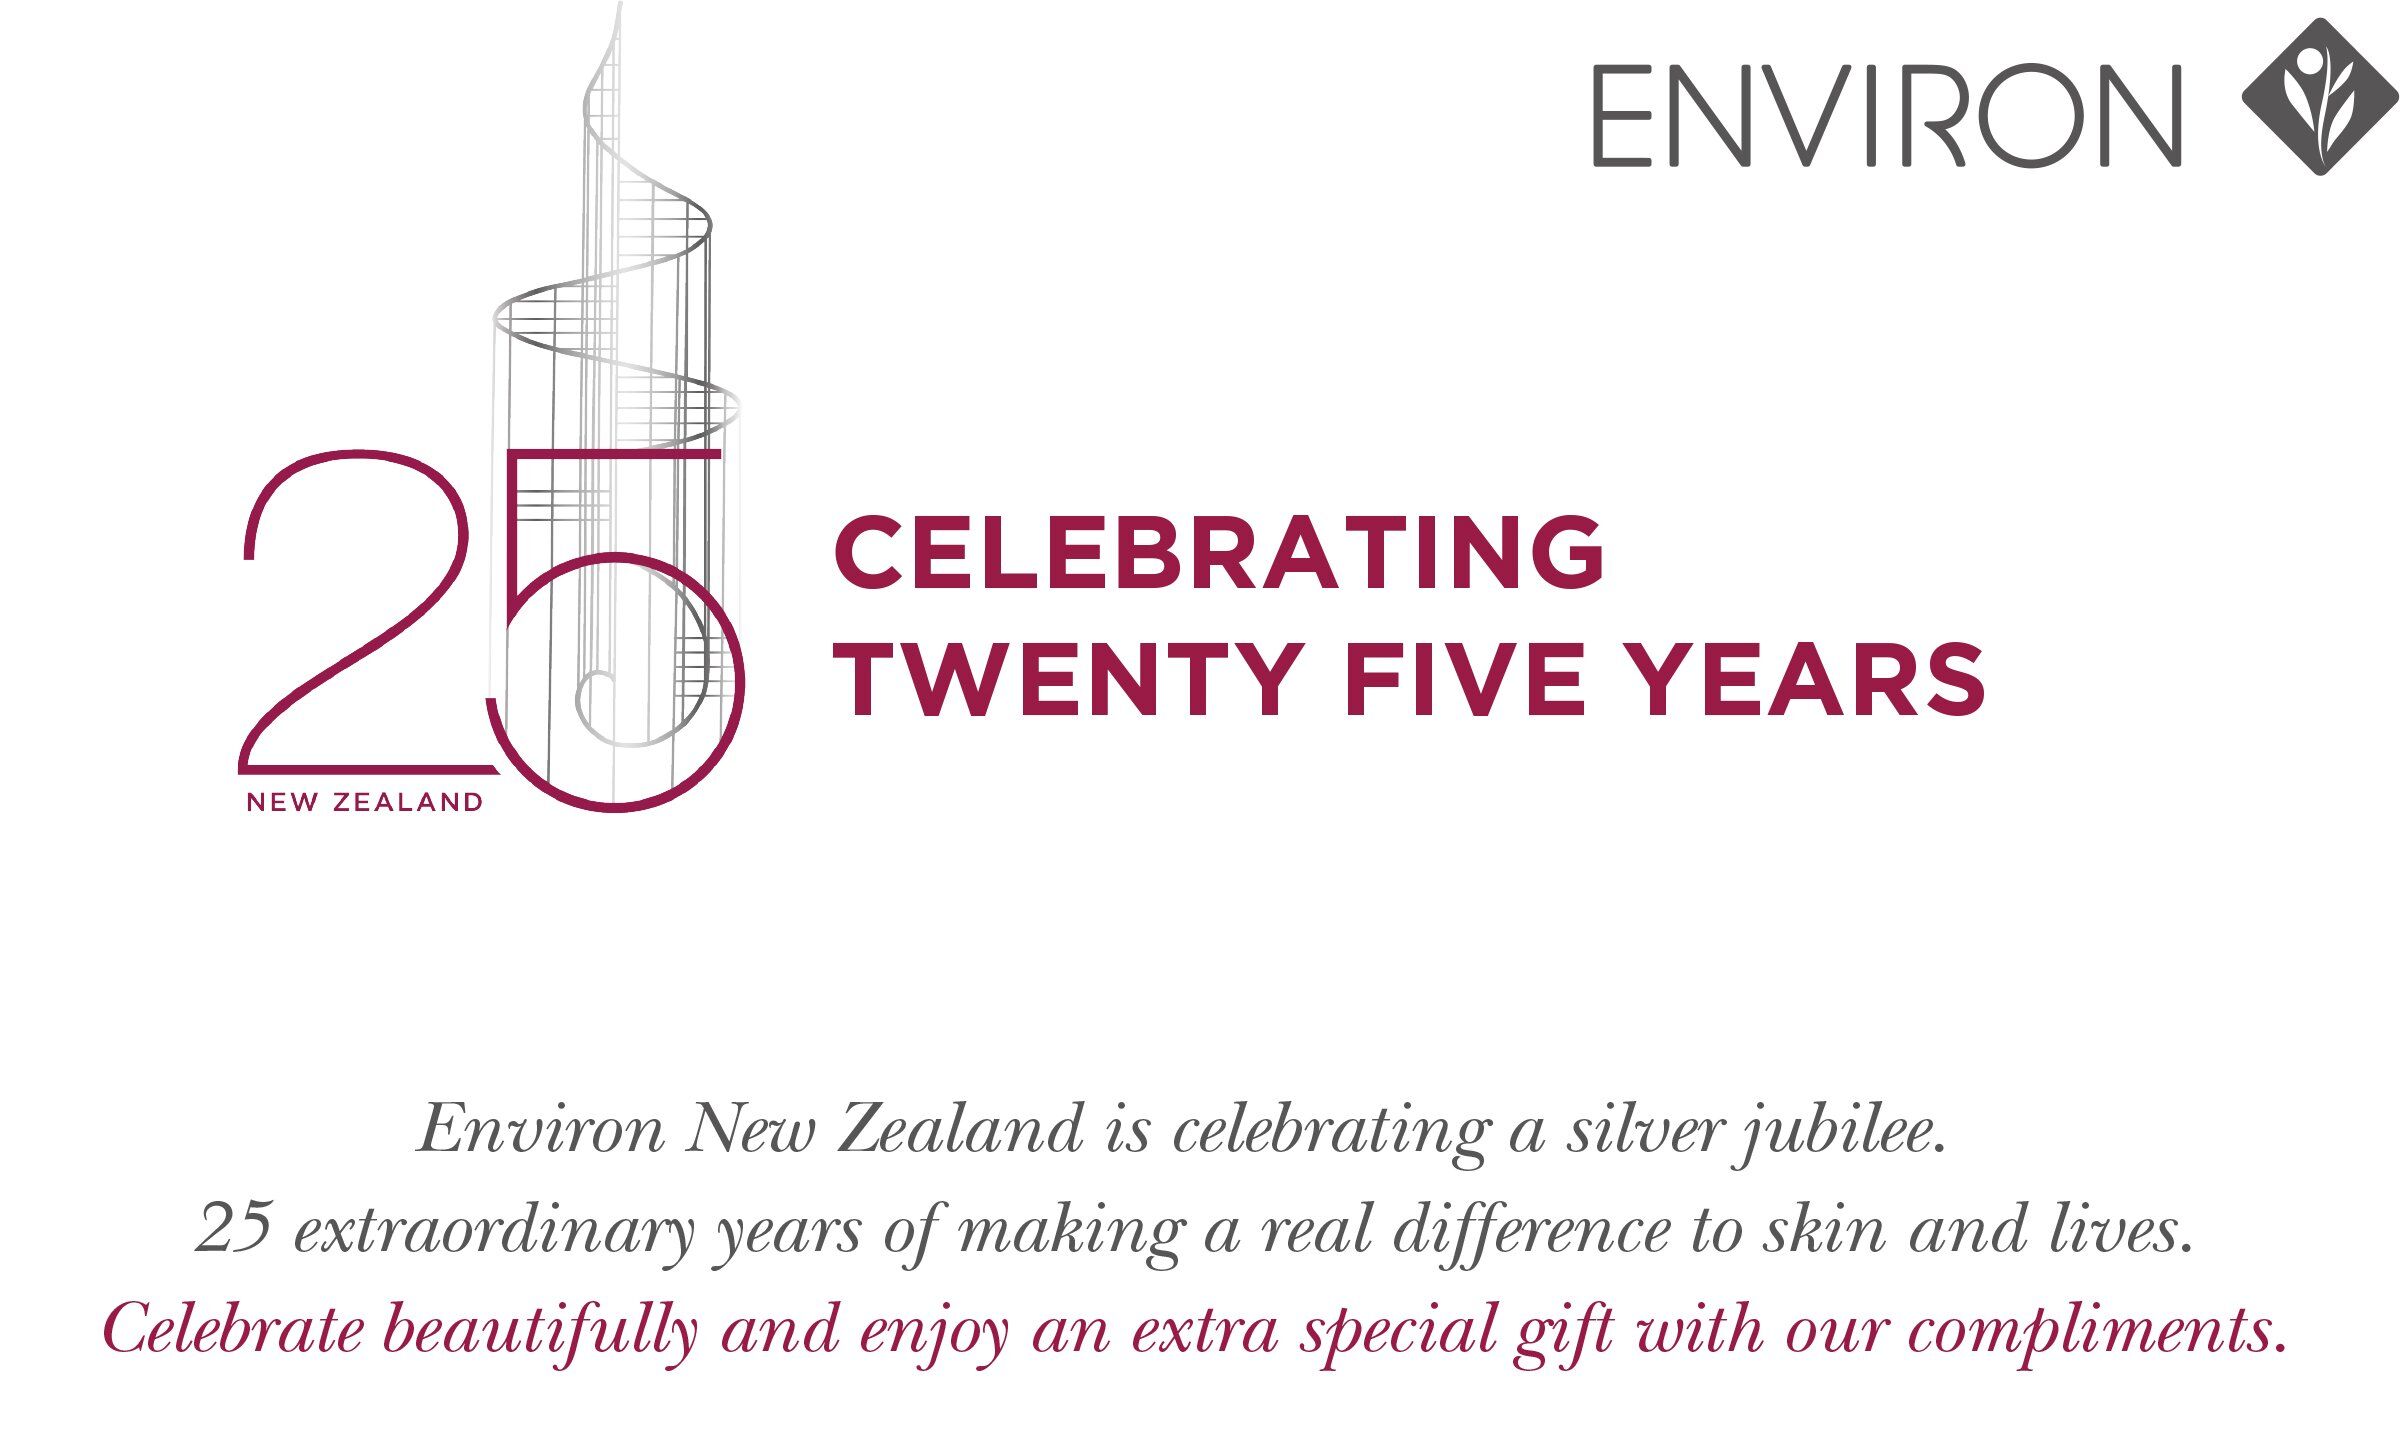 BE IN TO WIN 1 OF 25 ENVIRON PRODUCTS